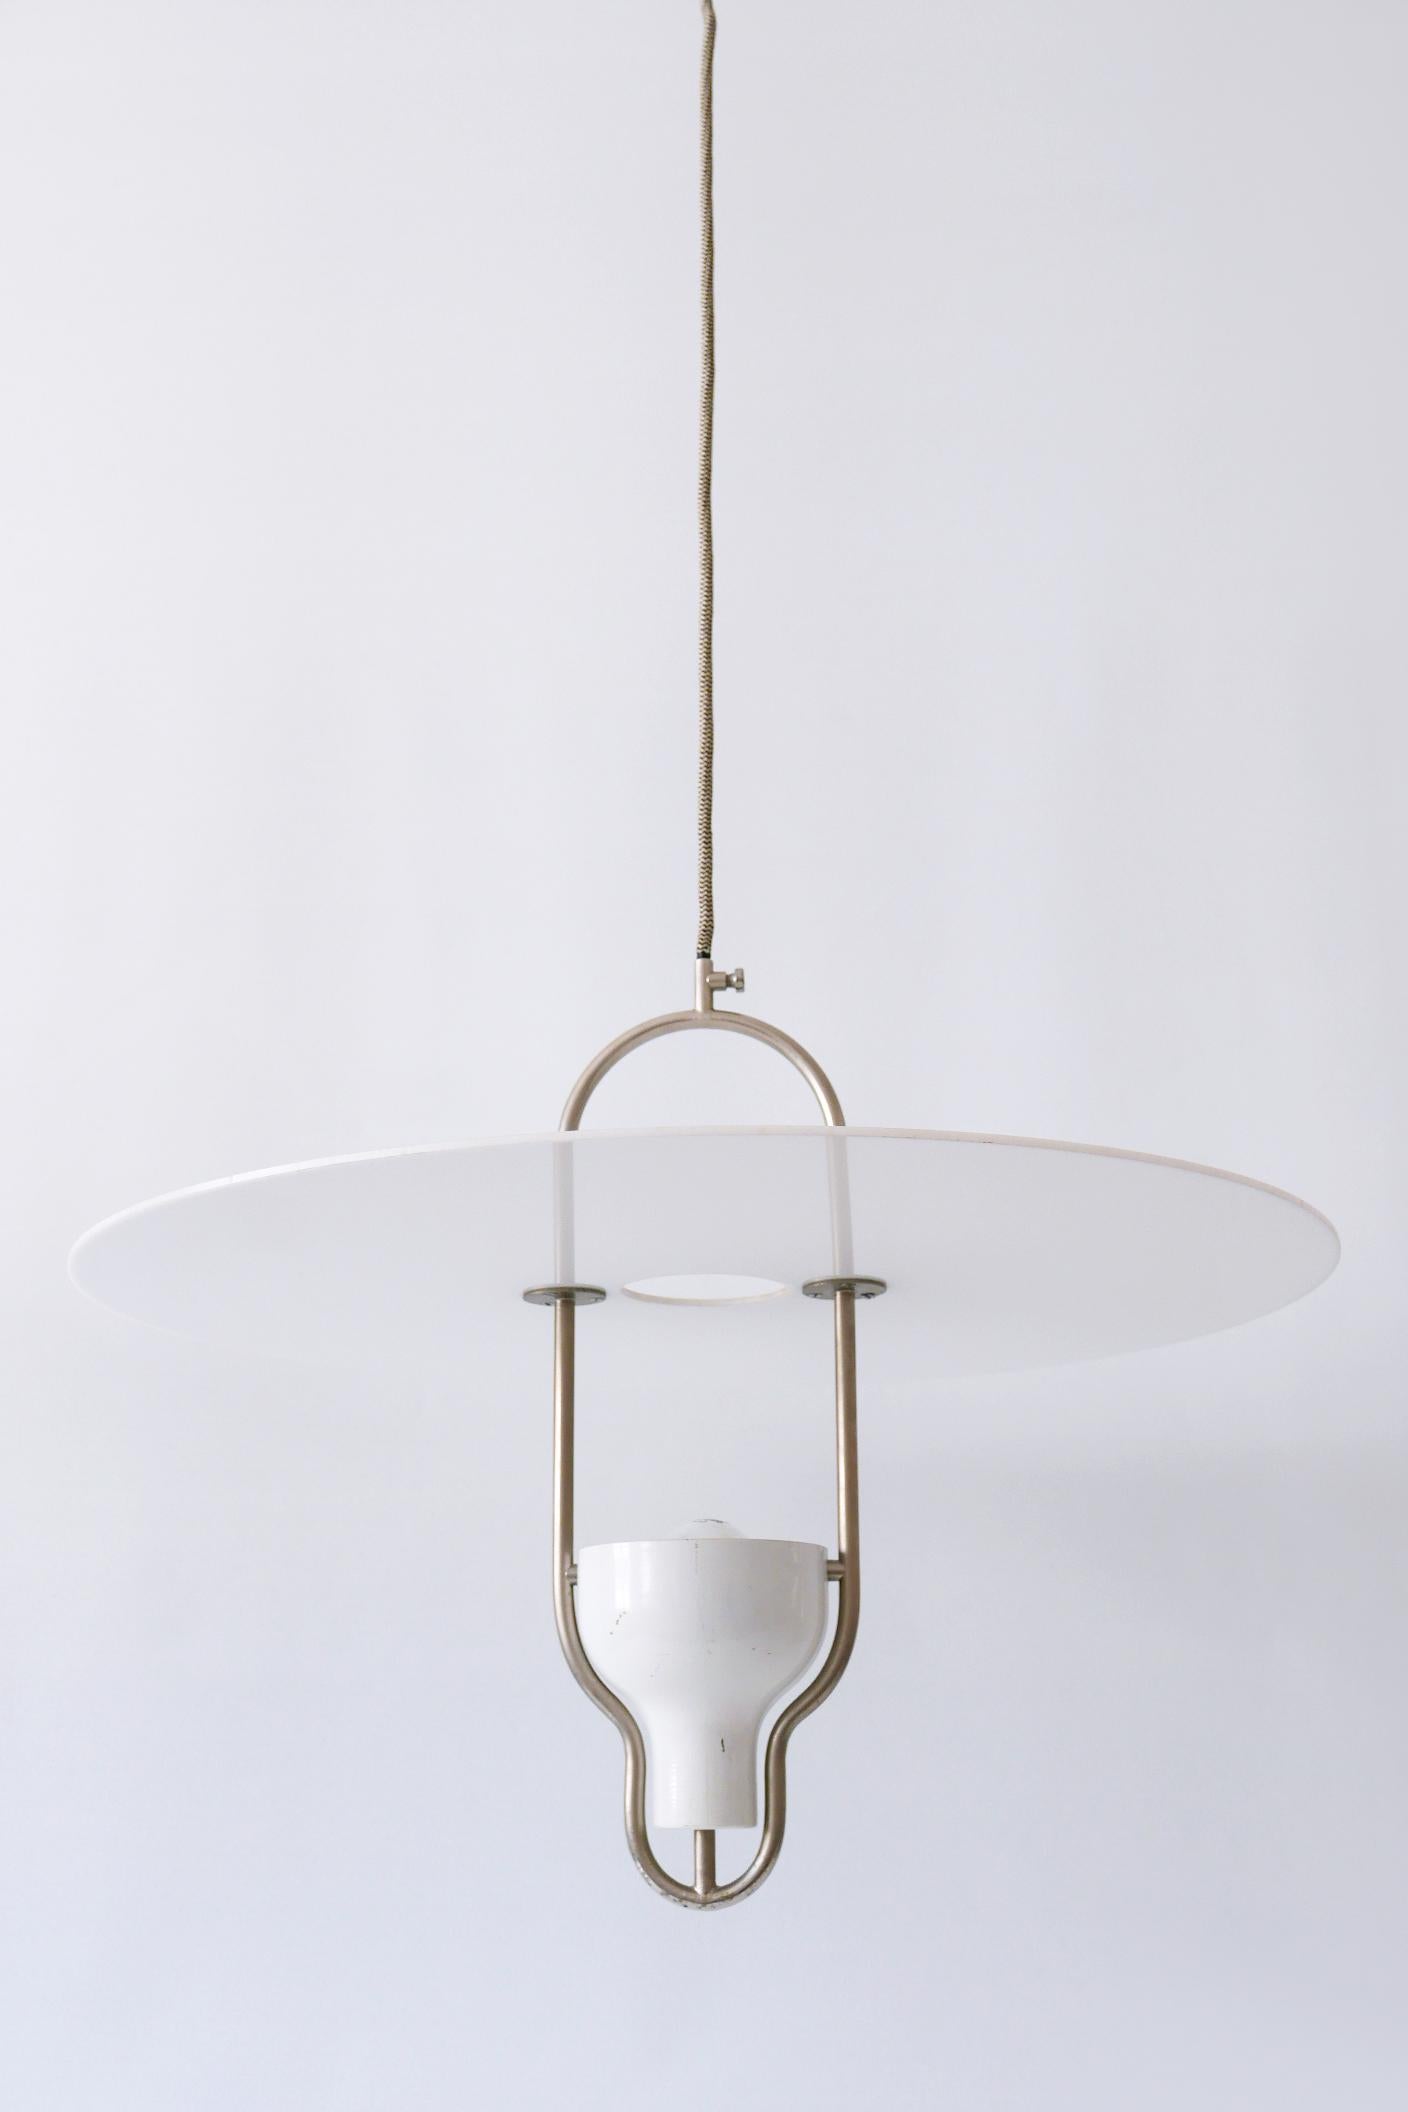 Exceptional Mid-Century Modern Ufo Pendant Lamp, Italy, 1960s For Sale 8